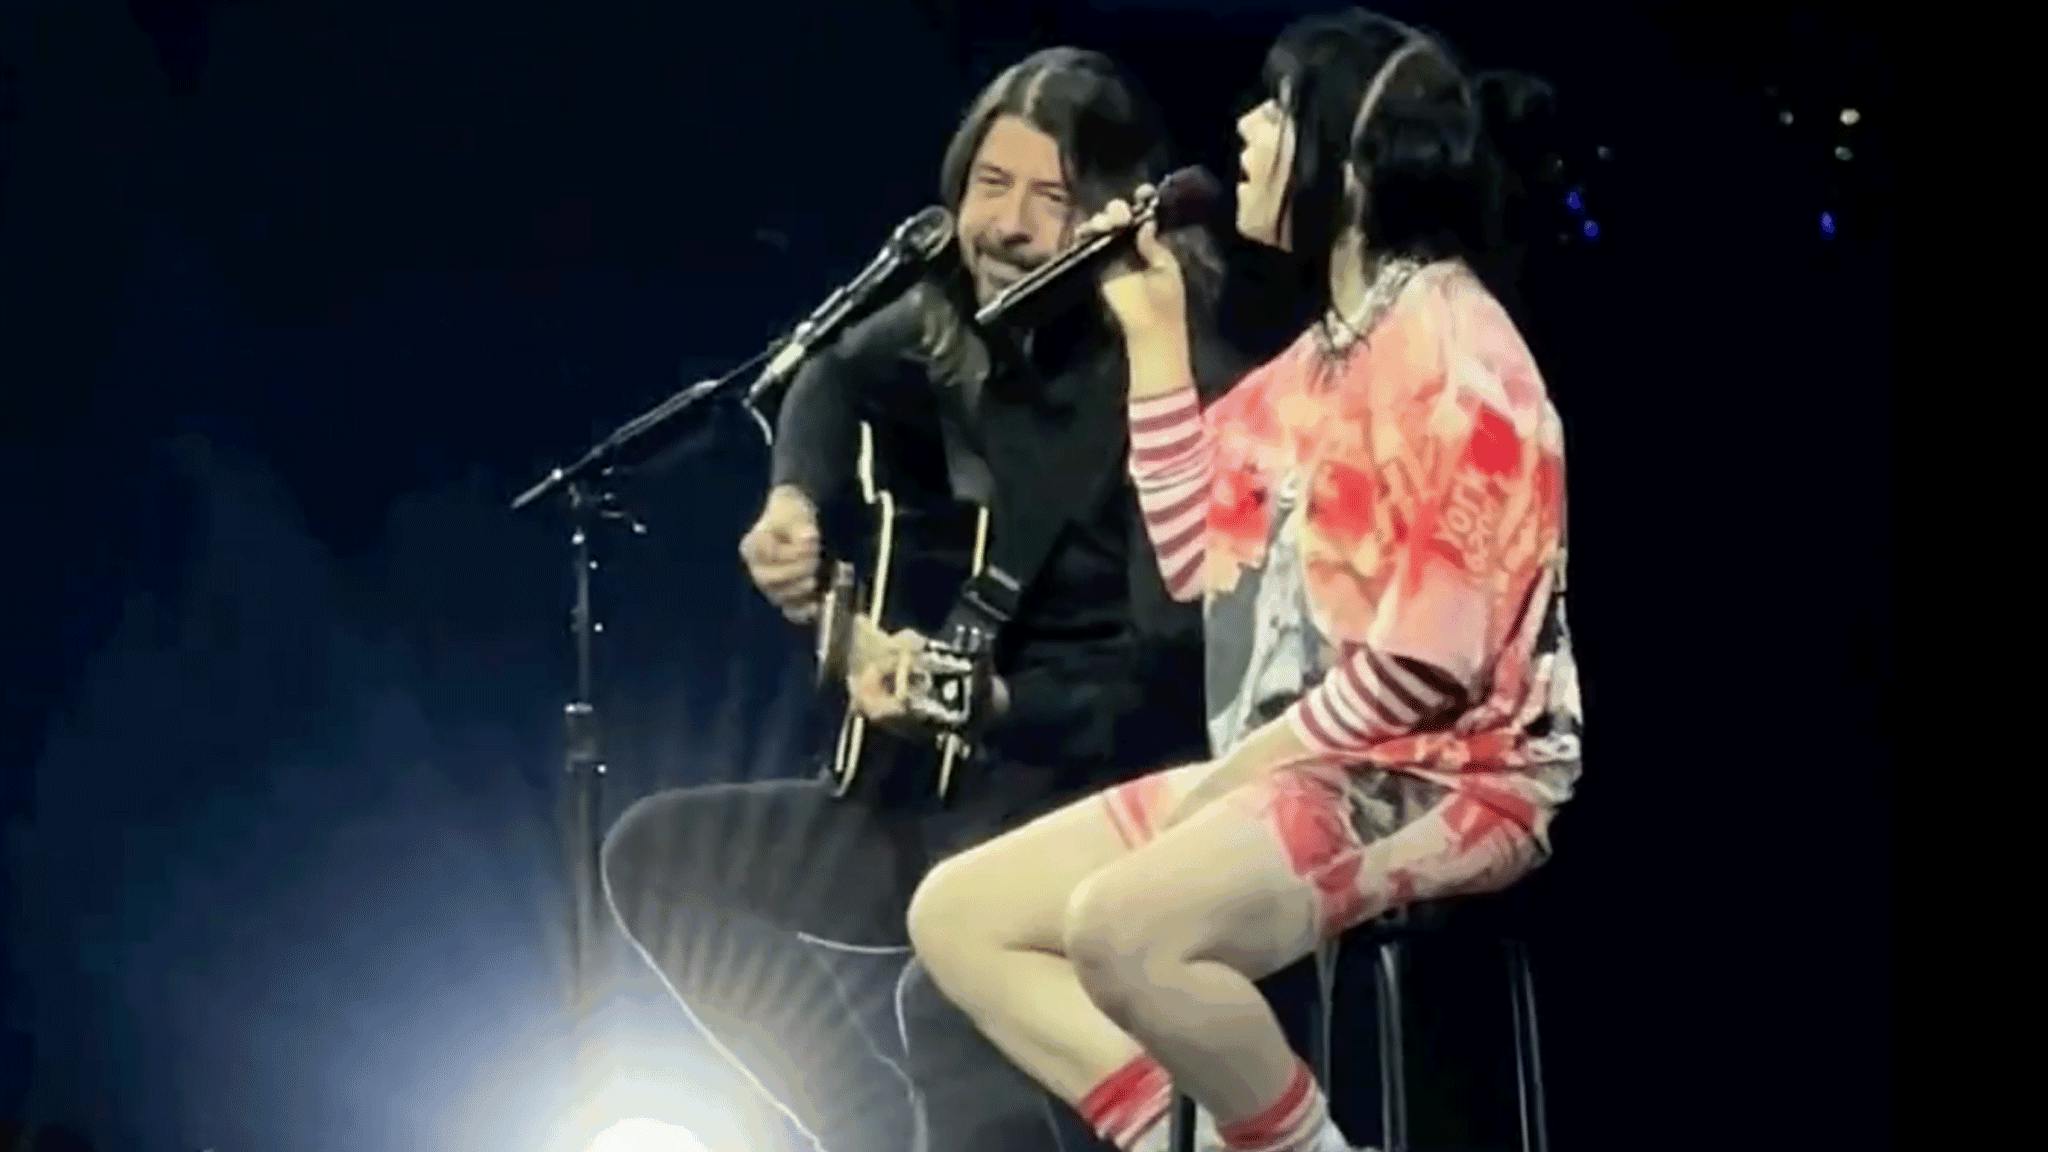 See Dave Grohl and Billie Eilish perform Foo Fighters’ My Hero